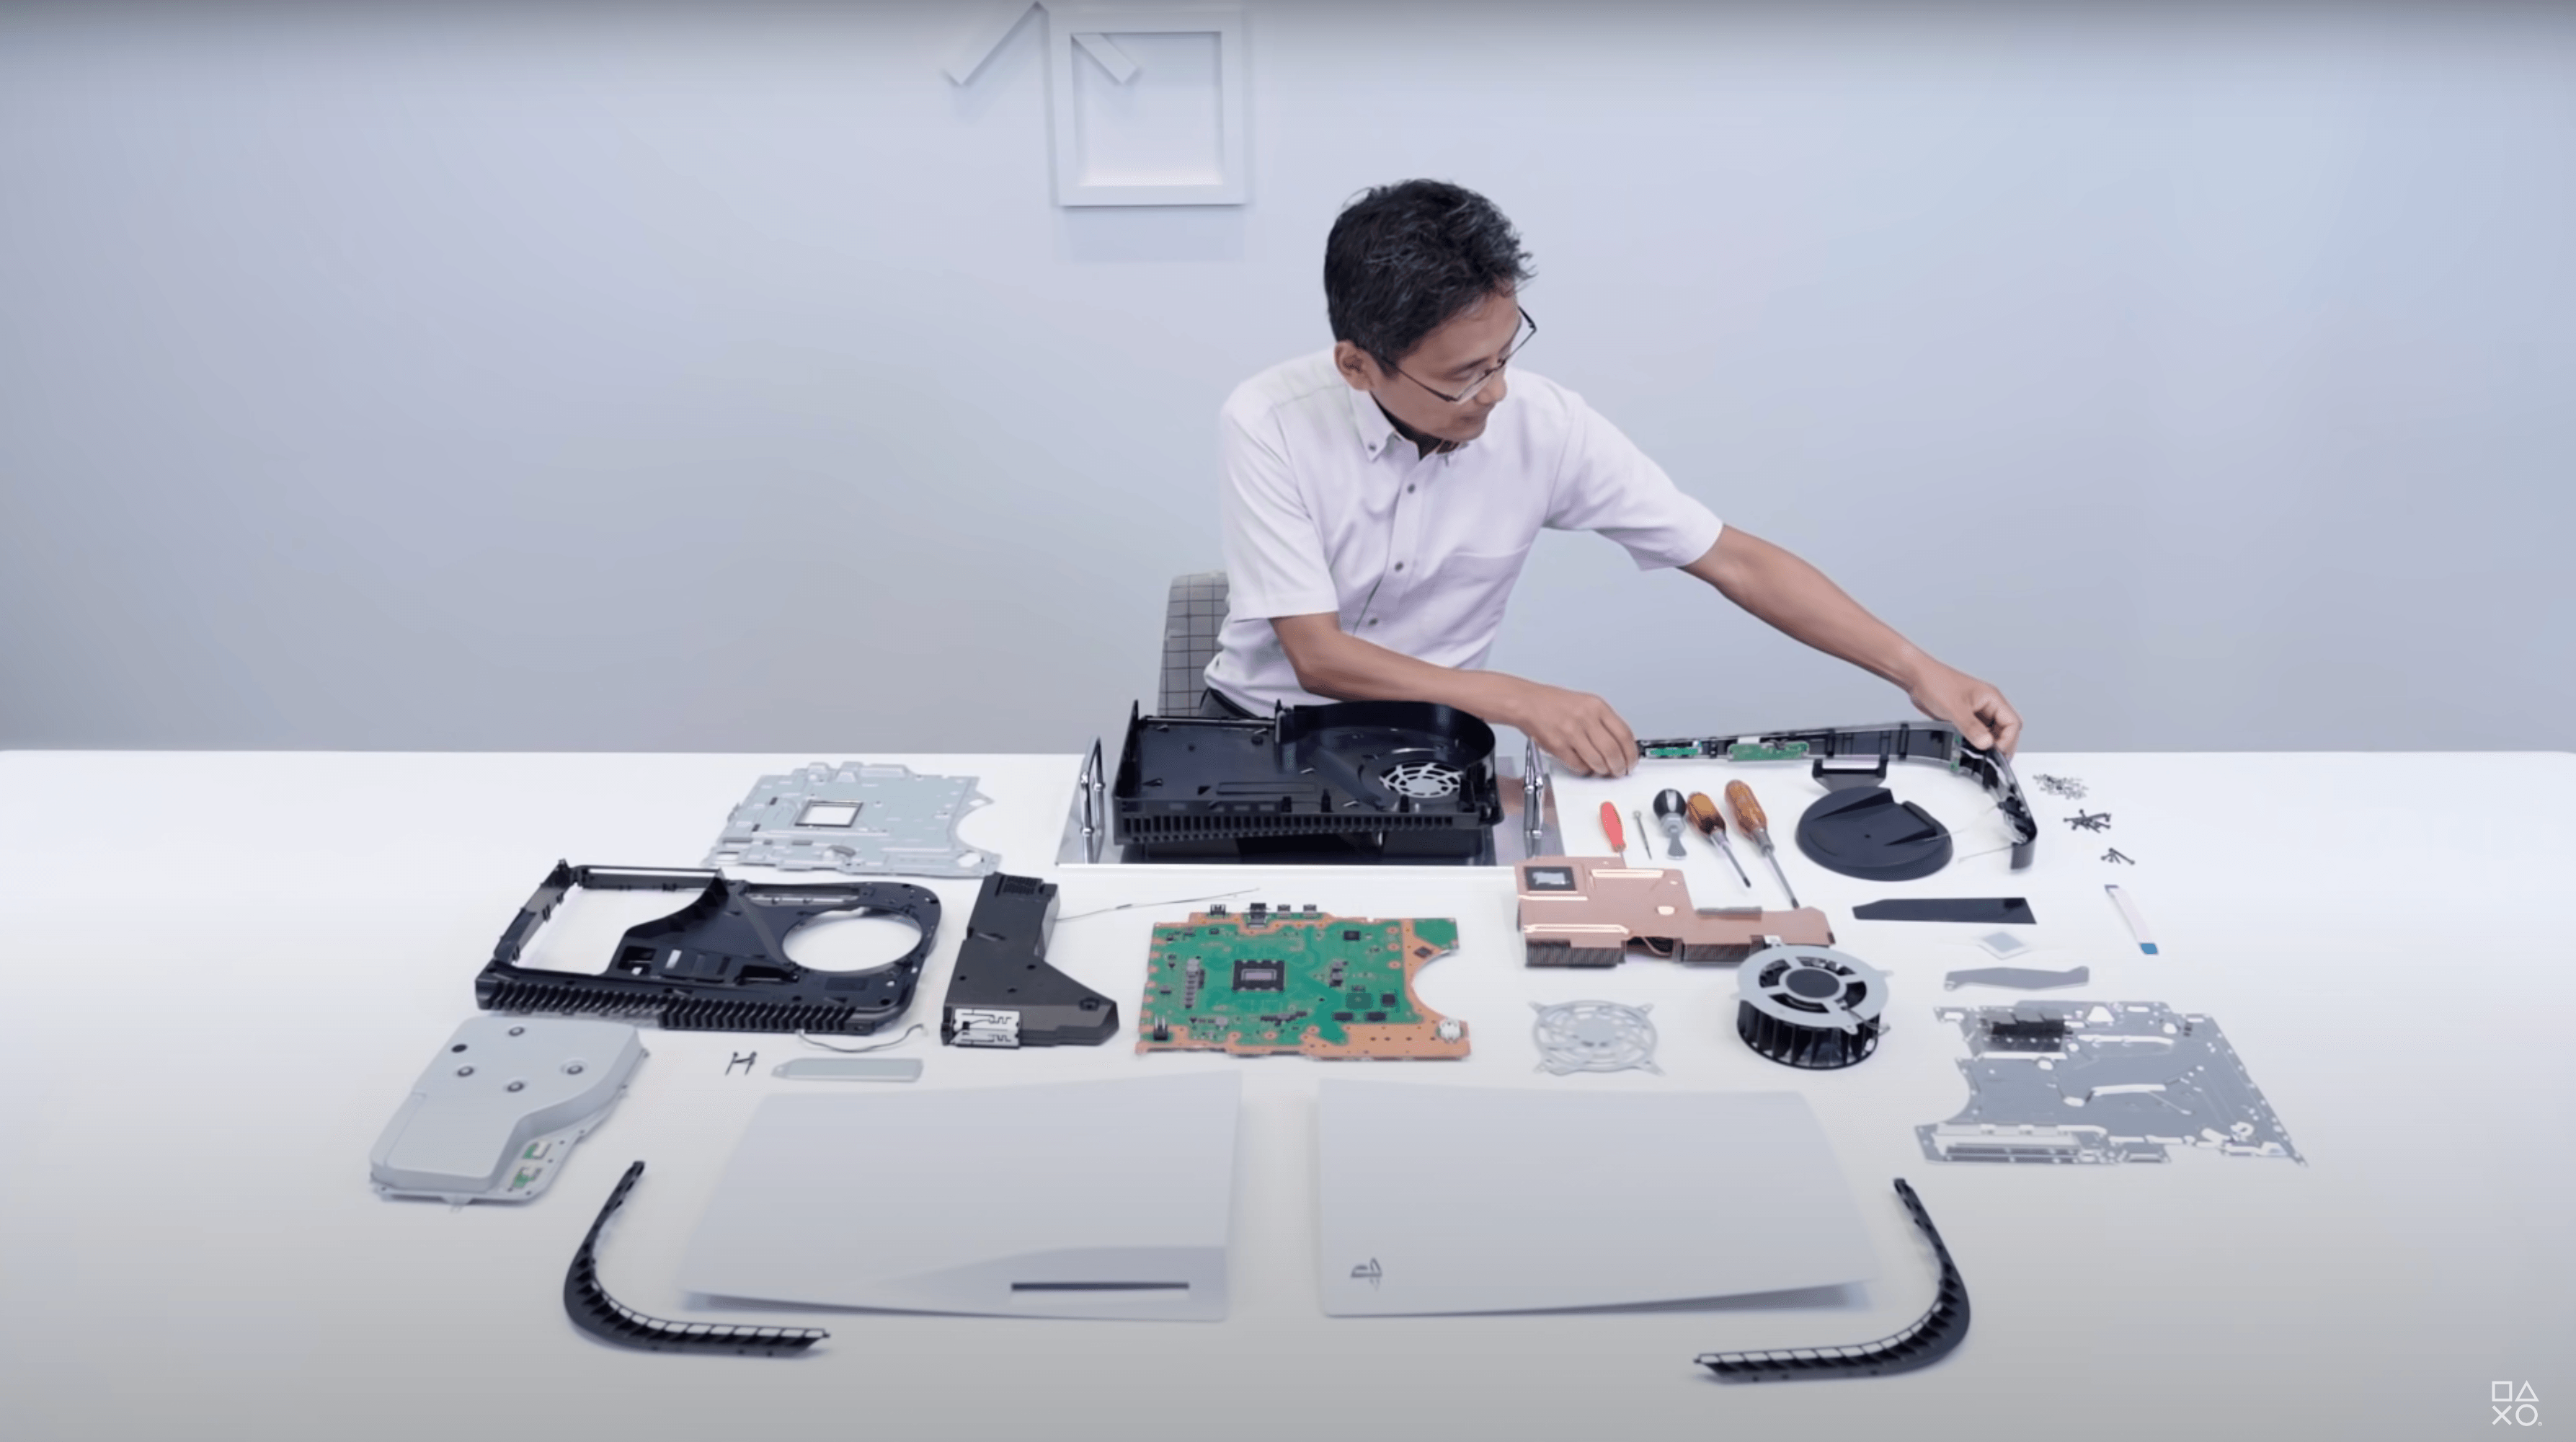 A man is putting together some sort of product - he appears to be doing an engineering review of hardware alone in a conference room